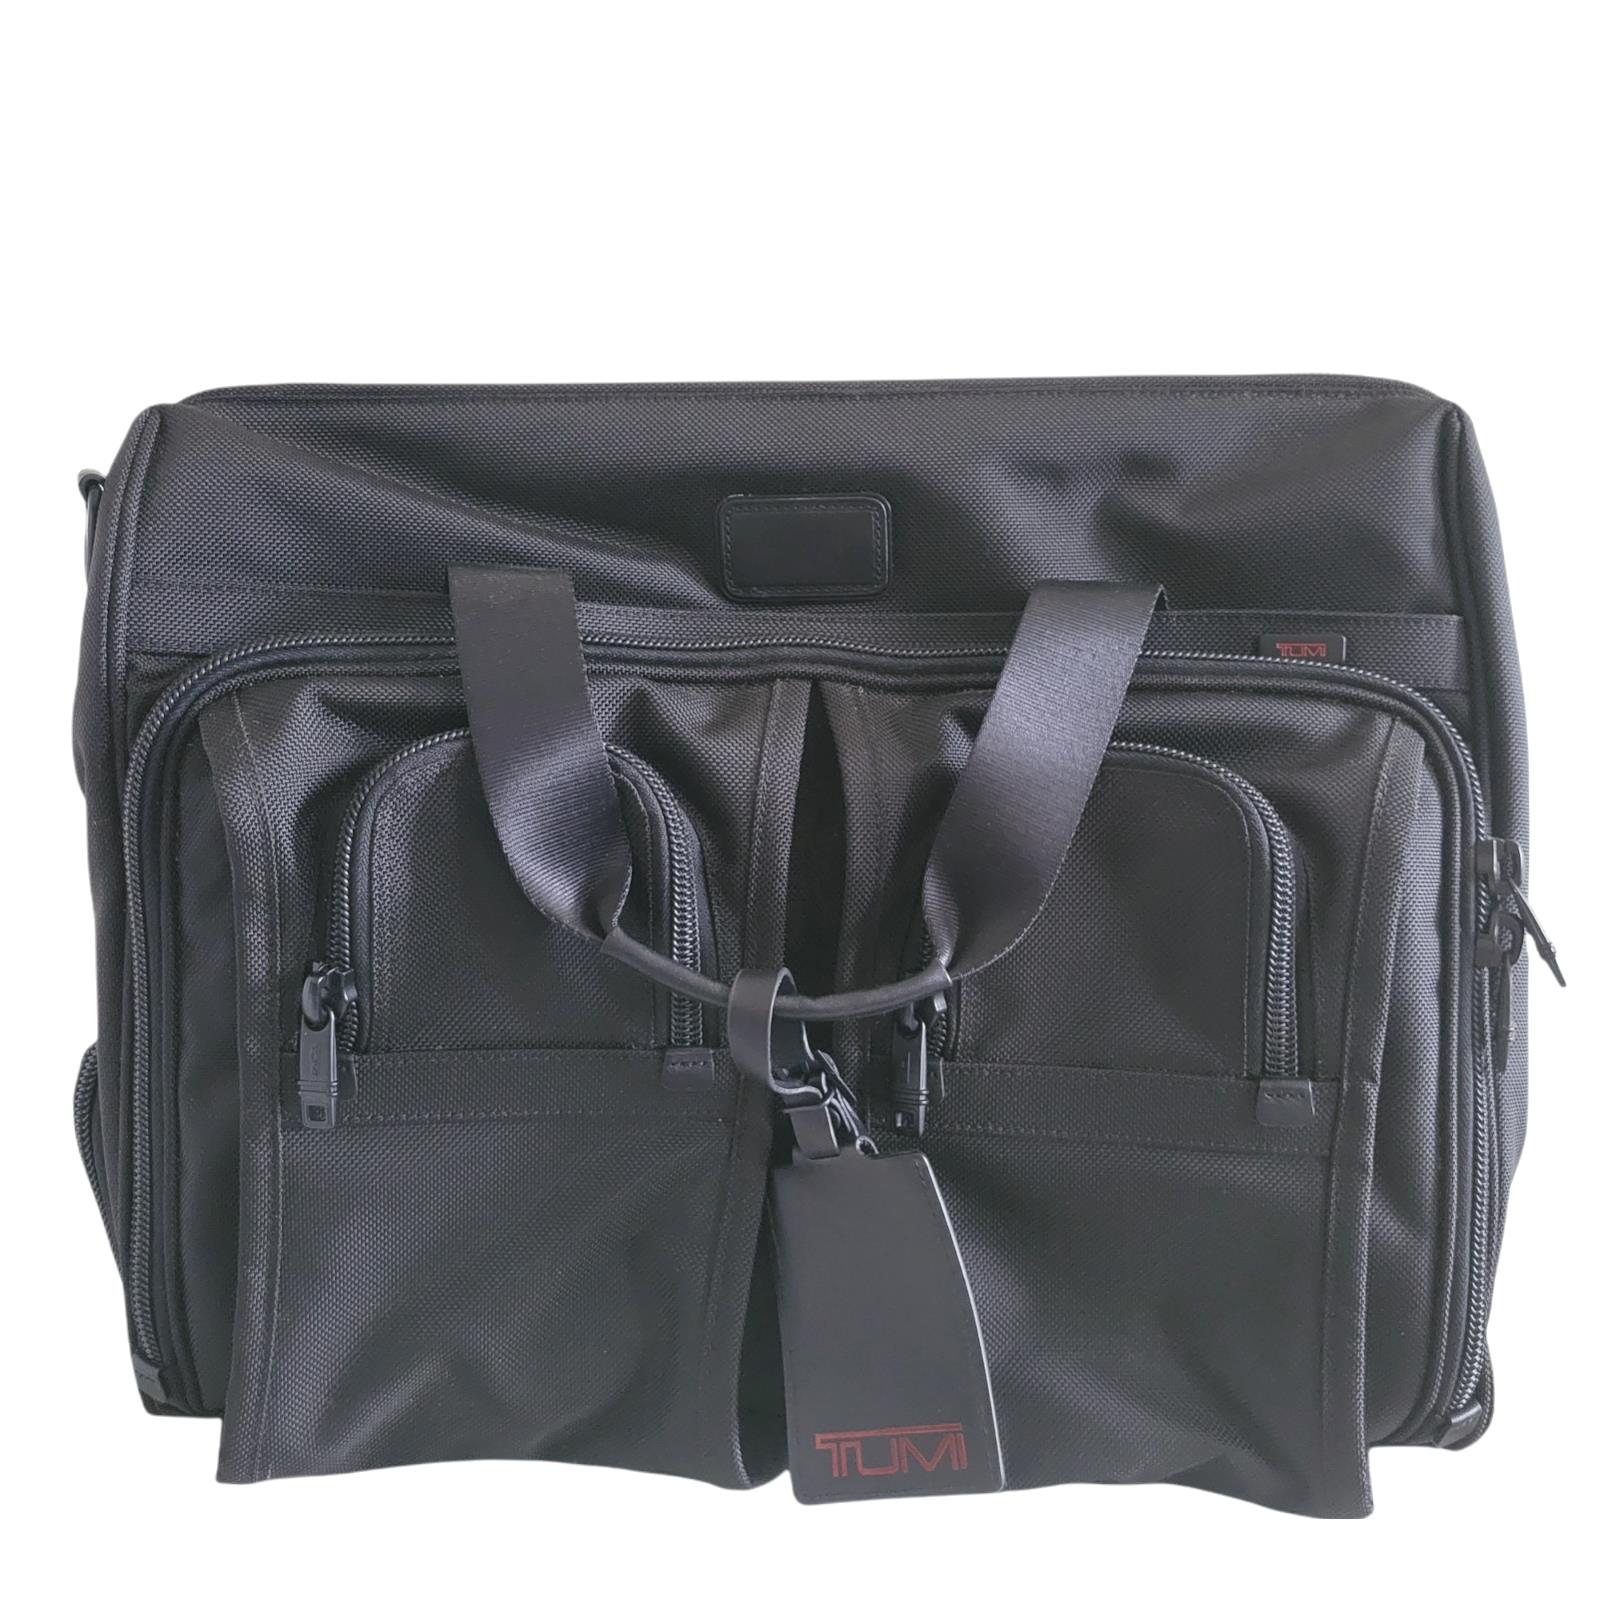 Tumi Alpha Deluxe Carry On Satchel Duffle Travel Gym Bag 022124DH Black